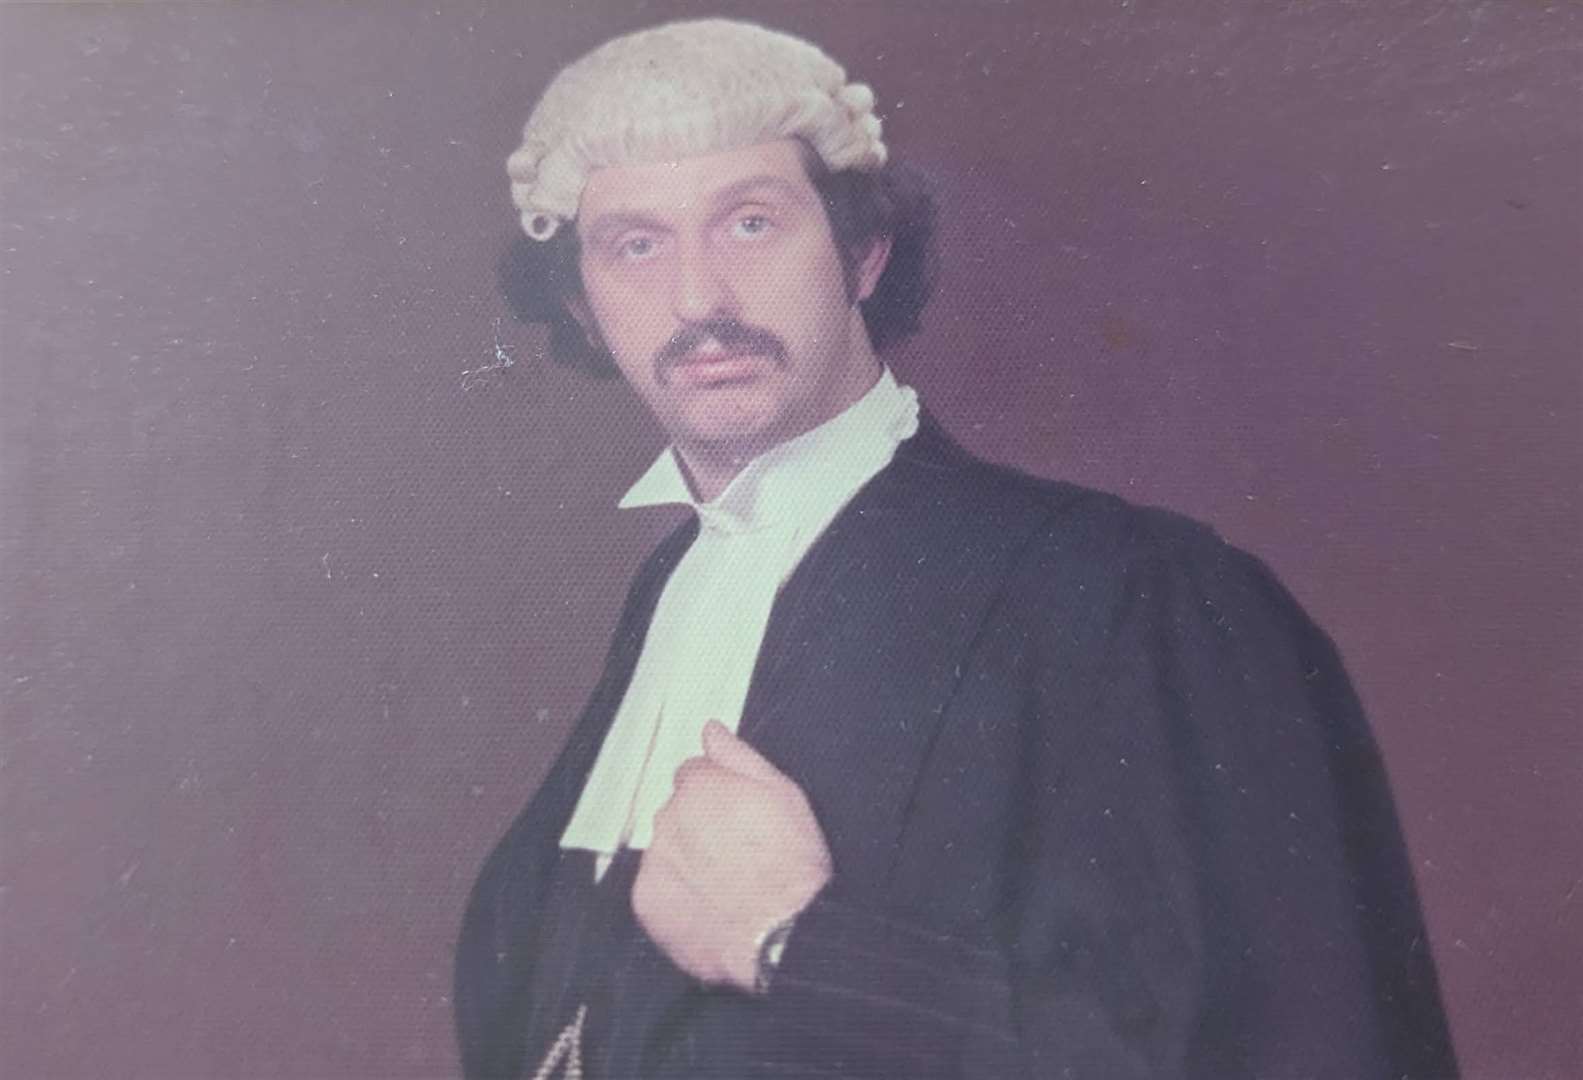 Ben Conlon pictured in his barrister's robes after being called to the Bar in the 1970s. Picture: Ben Conlon